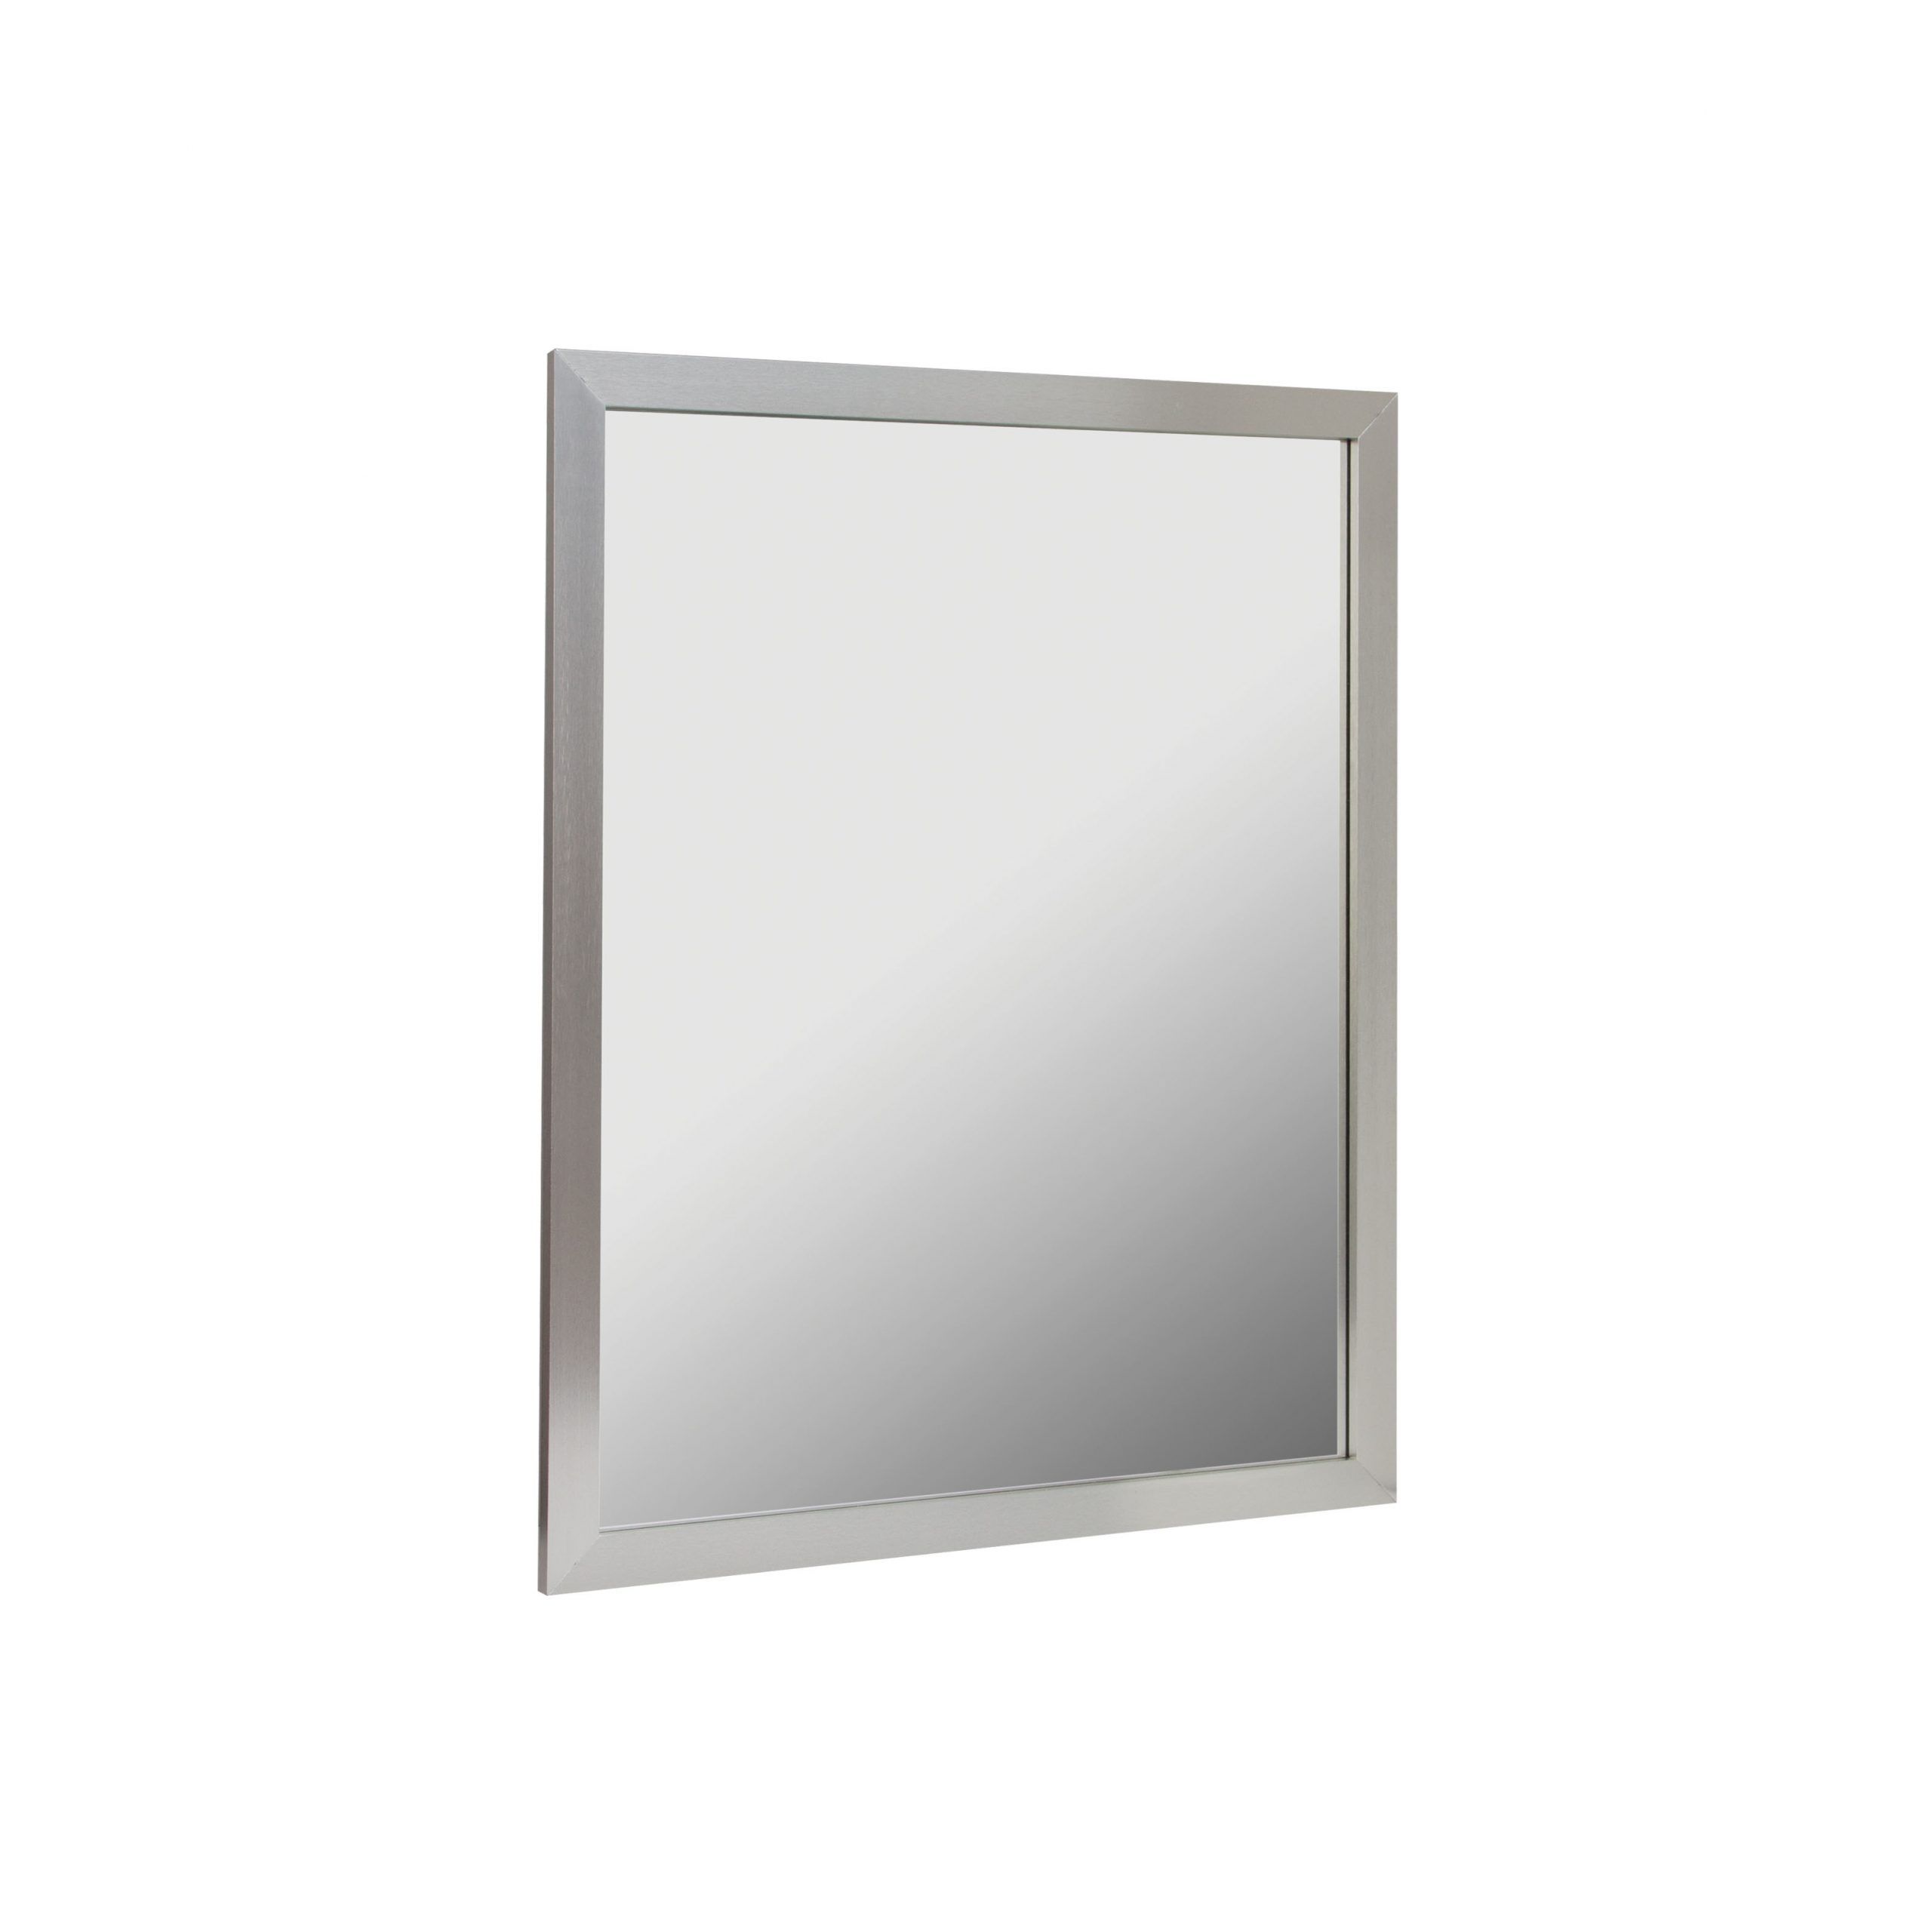 24X30 Aluminum Framed Mirror In Brushed Nickel – Foremost Bath Pertaining To Oxidized Nickel Wall Mirrors (View 1 of 15)